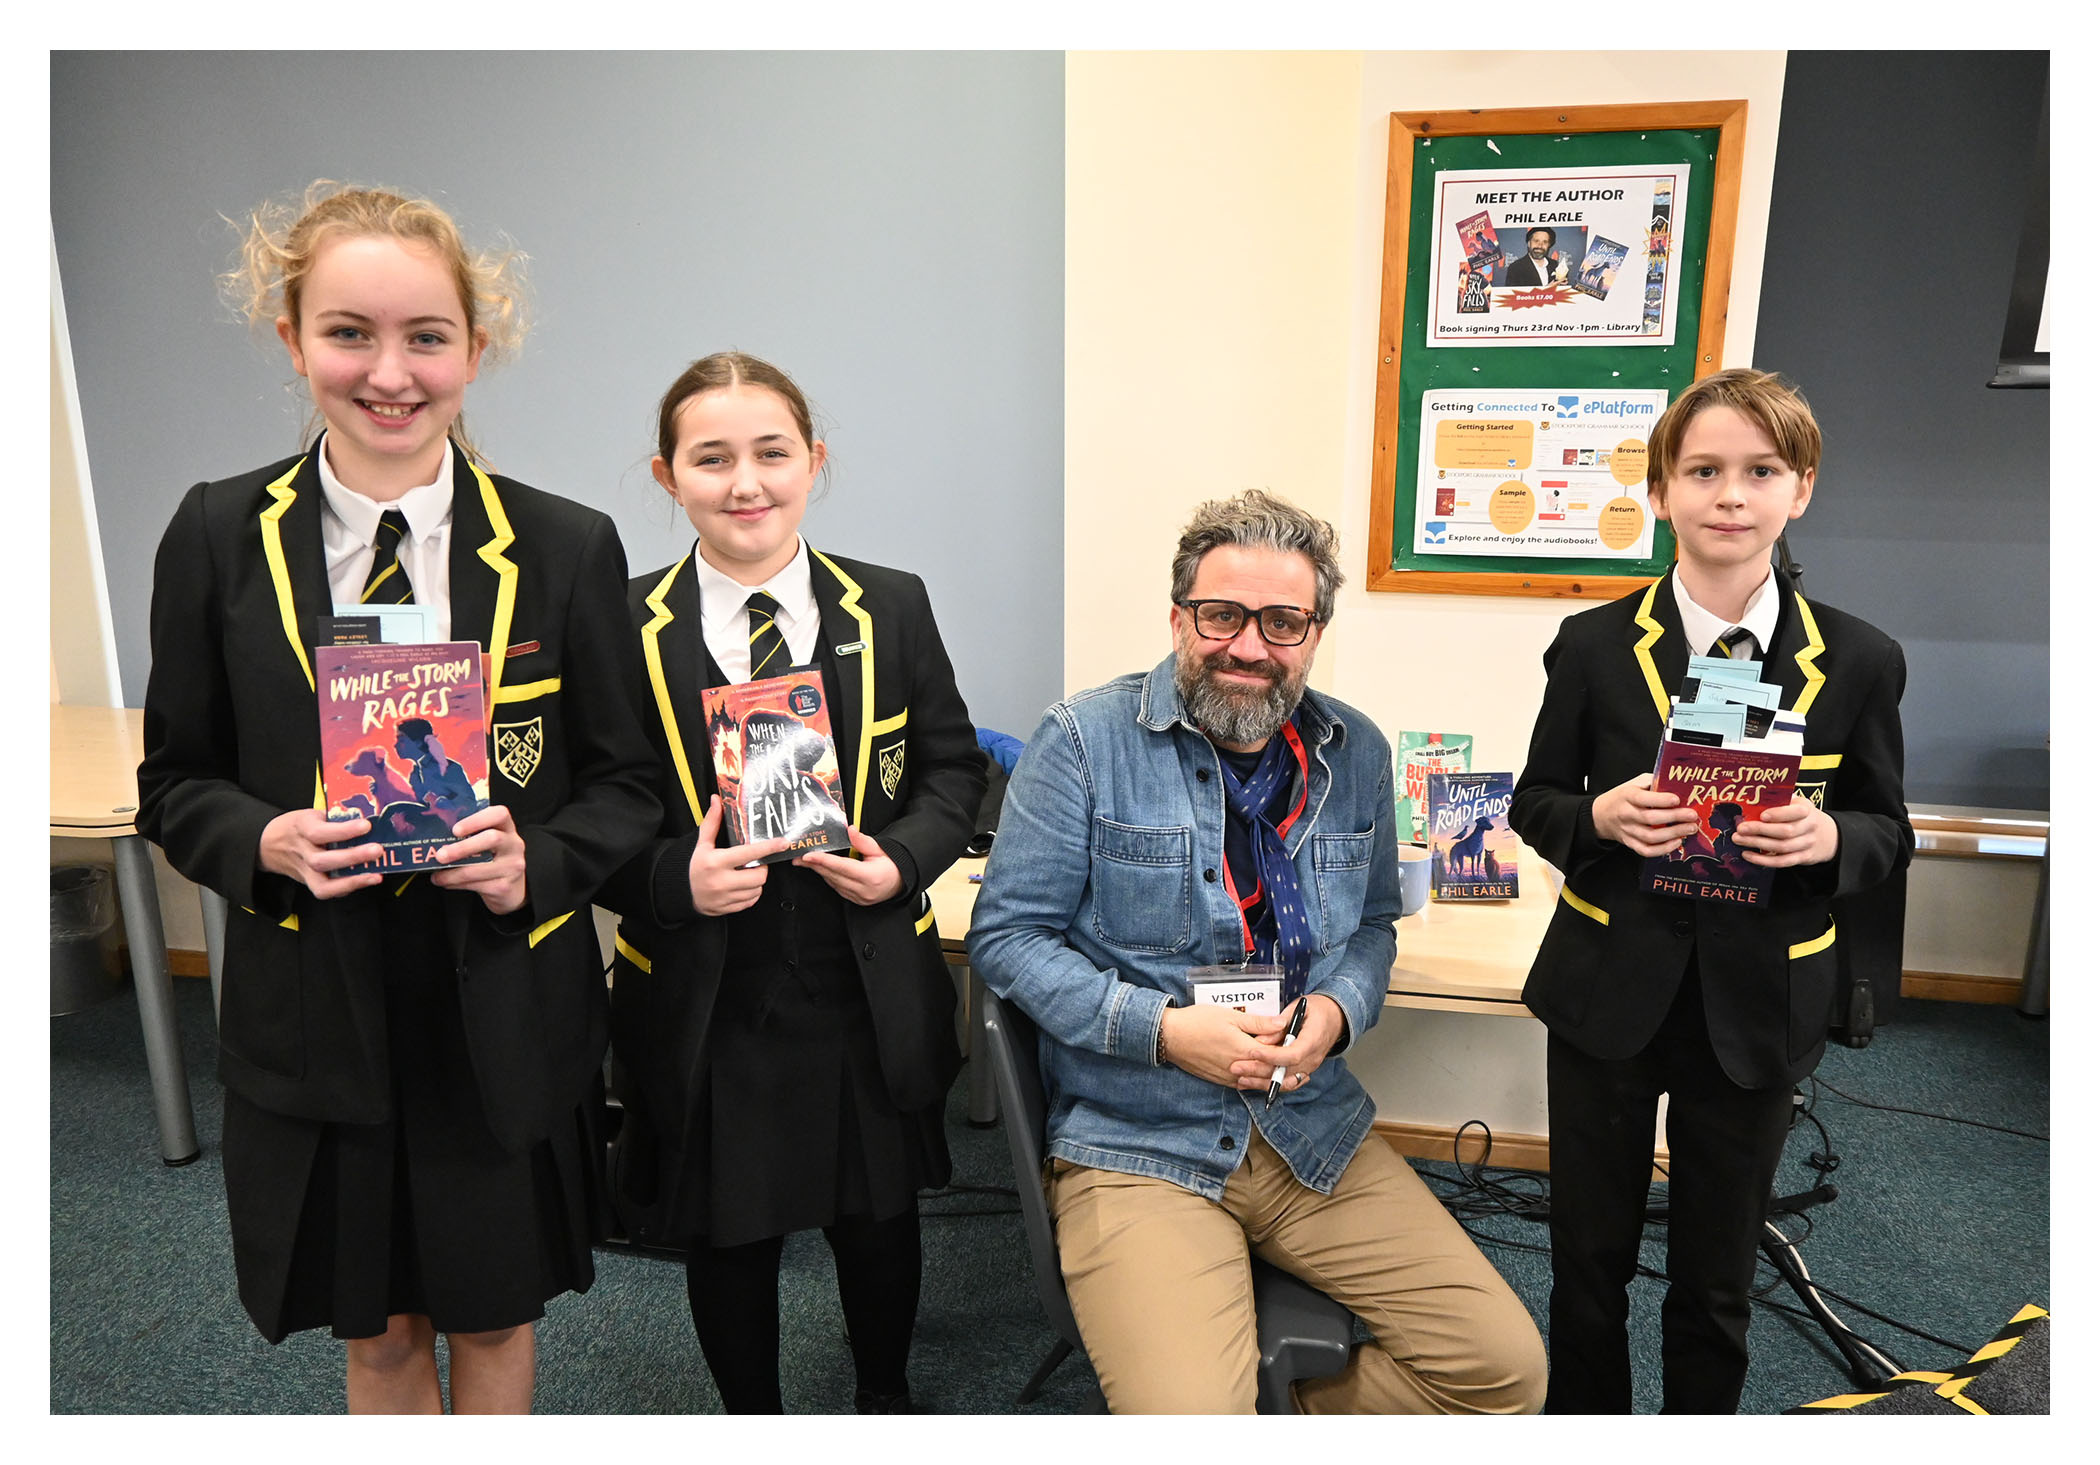 Pupils pose with books alongside author Phil Earle